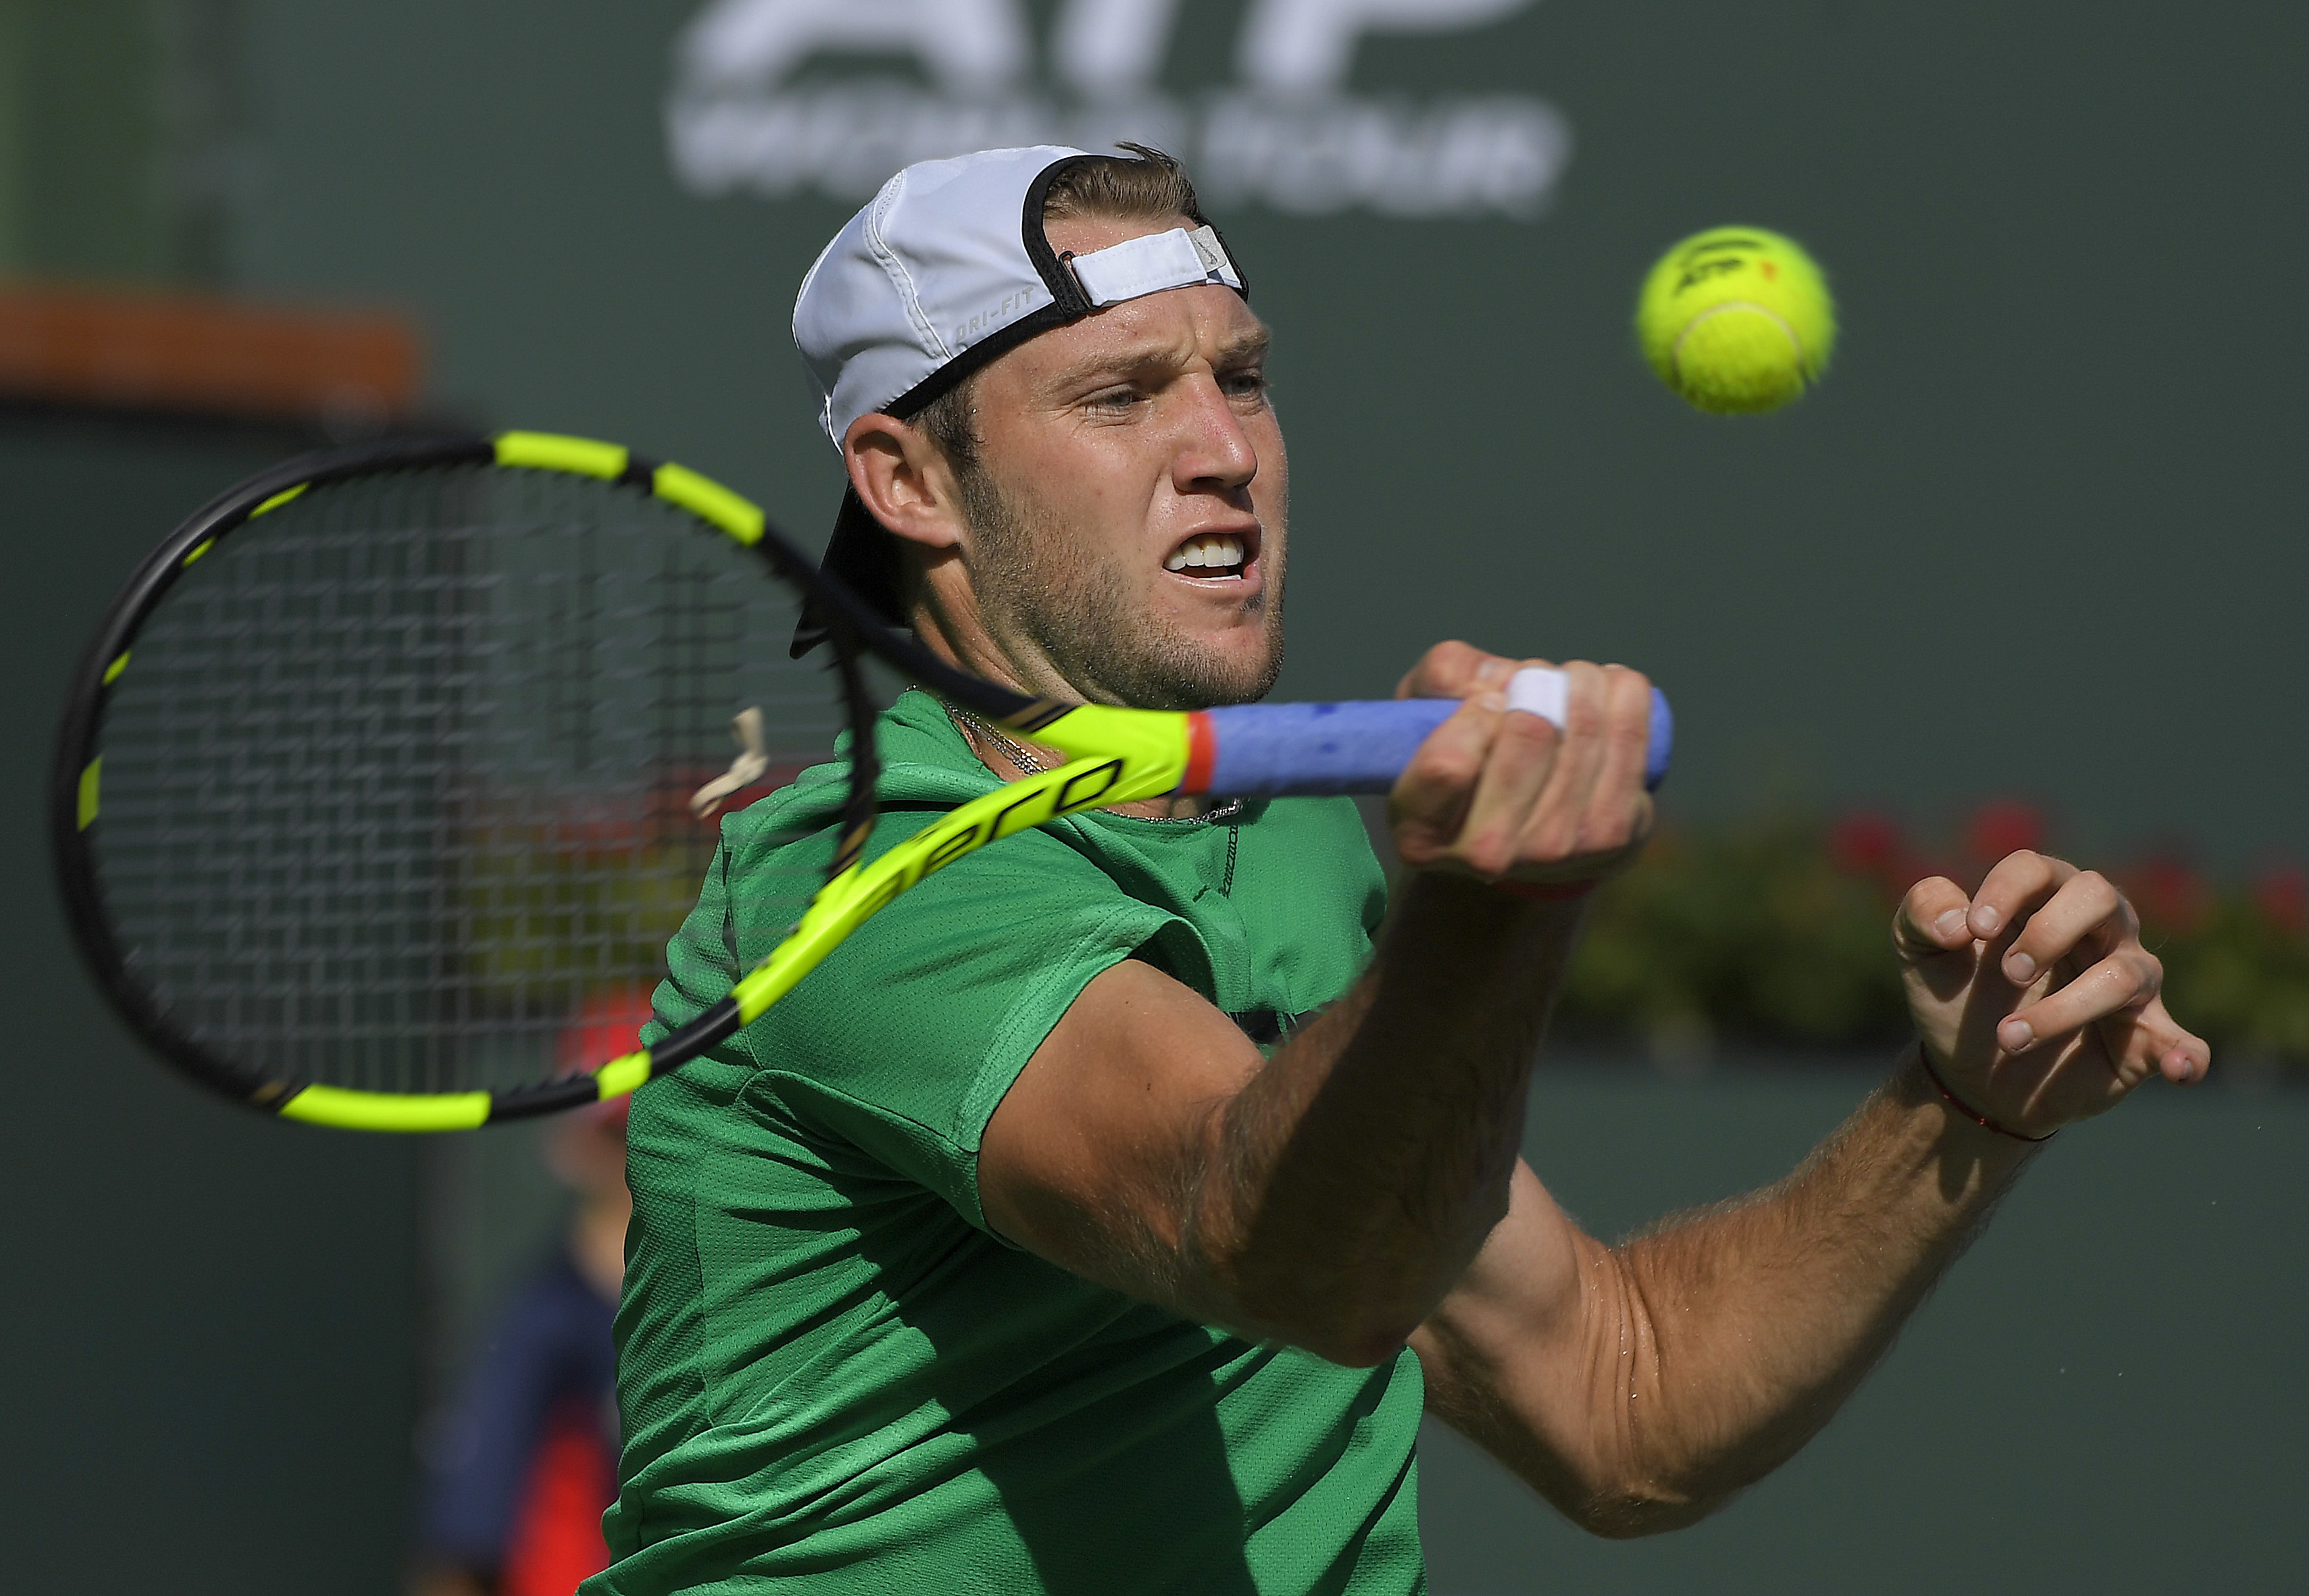 Sock picks up biggest win of career, moves into Indian Wells semis